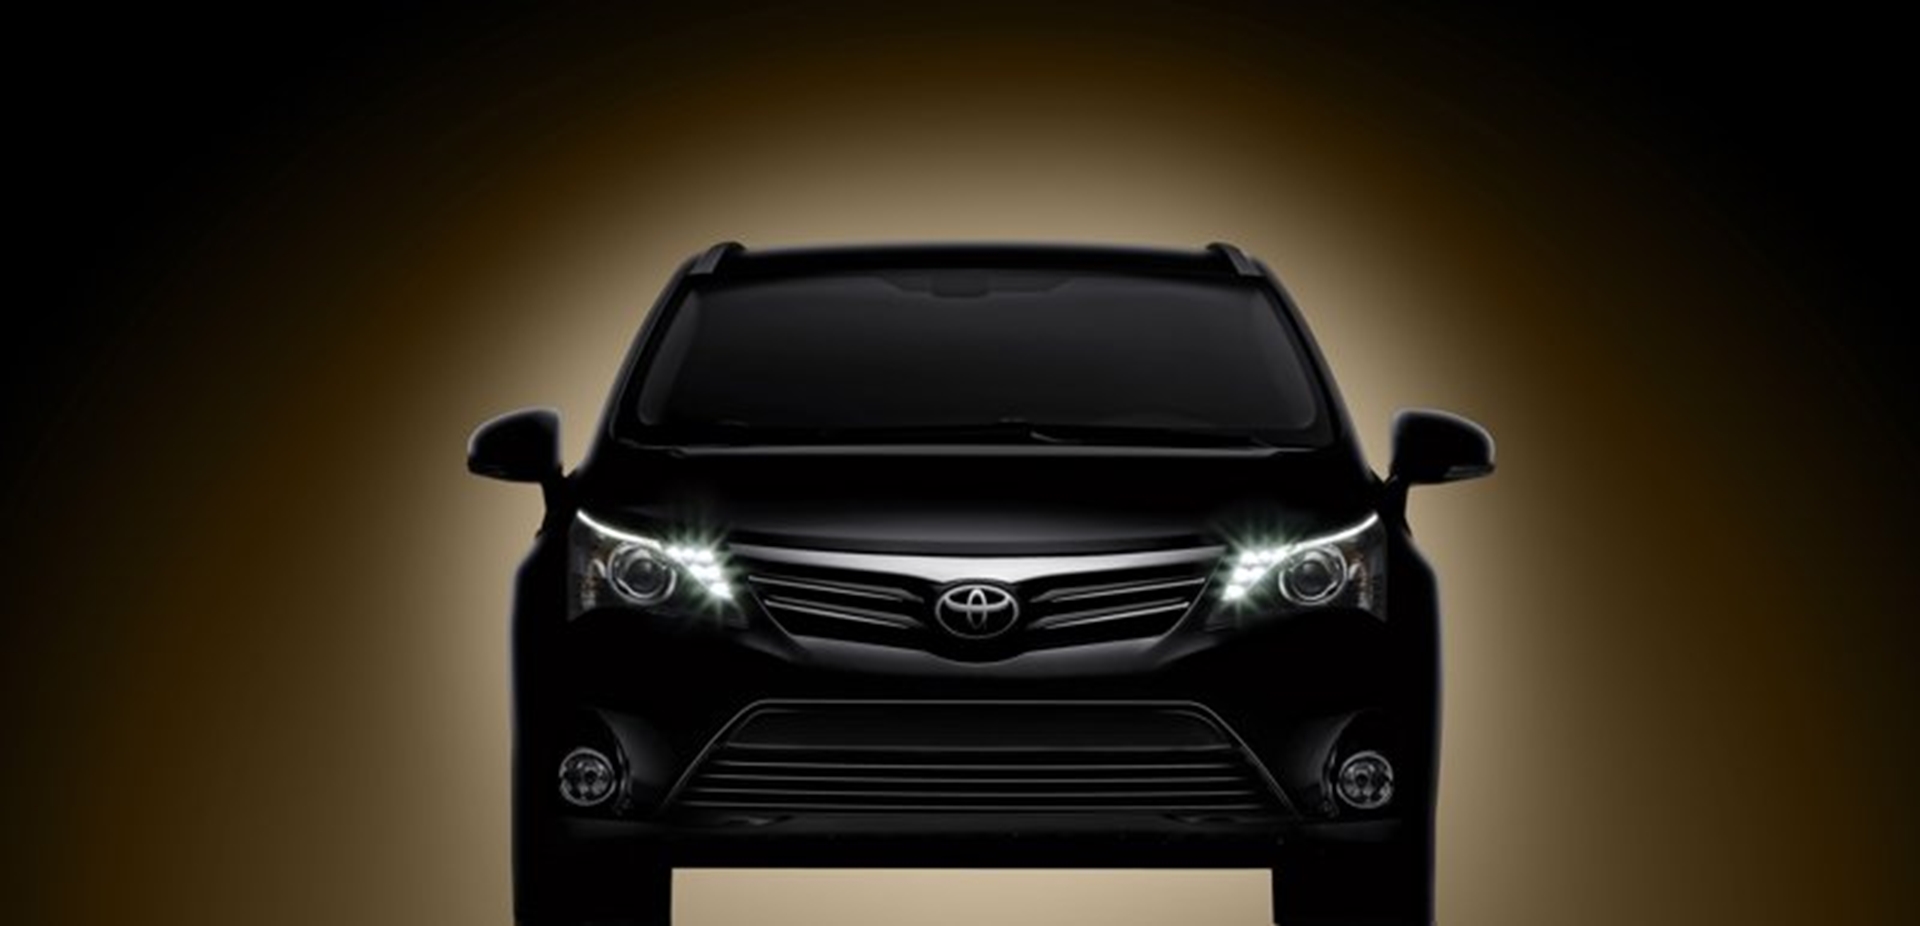 TOYOTA PRESENTS NEW AVENSIS AND PRIUS FAMILY WORLD PREMIERES AT 2011 FRANKFURT MOTOR SHOW